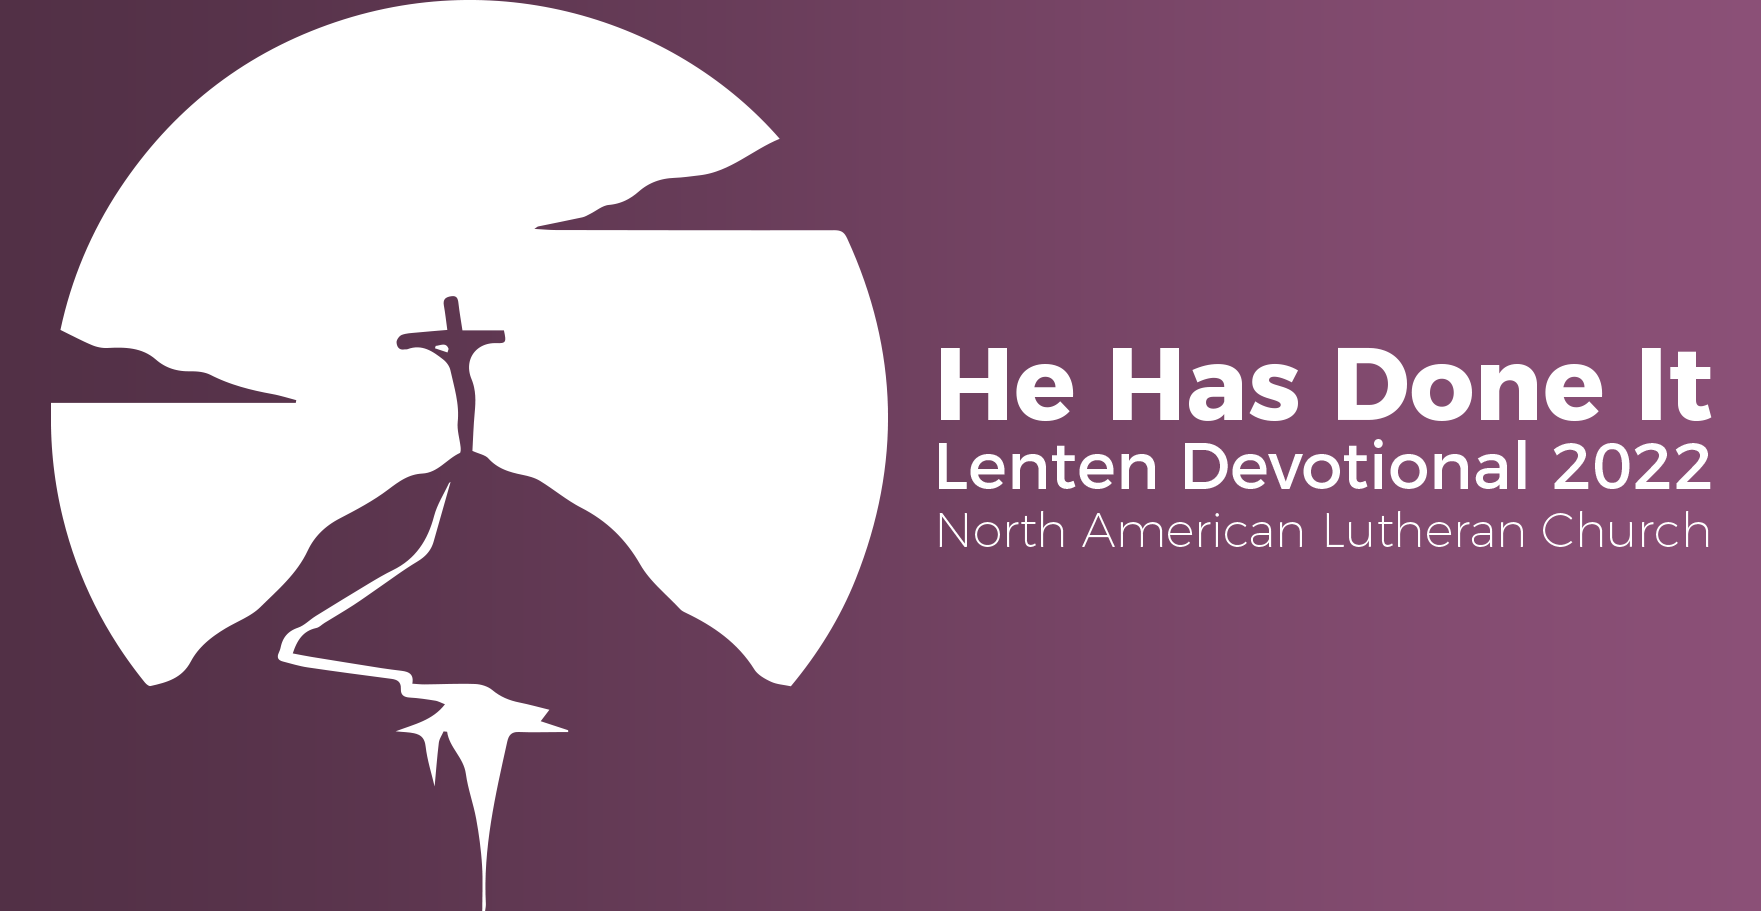 March 12, 2022 | Saturday of the Week of Lent I